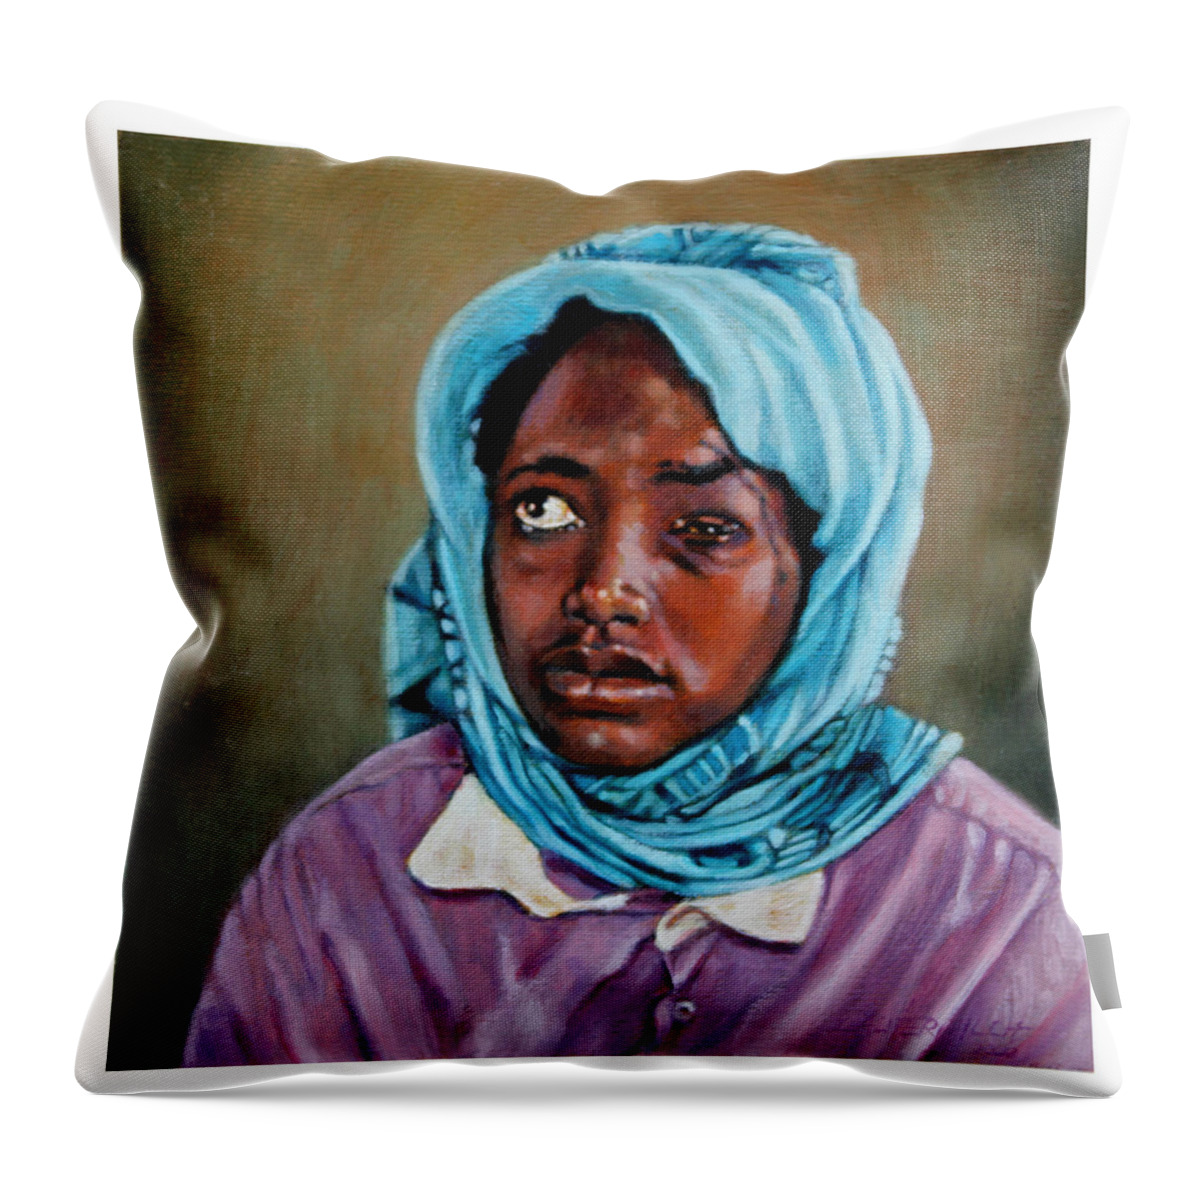 War Throw Pillow featuring the painting Collateral Damage by John Lautermilch